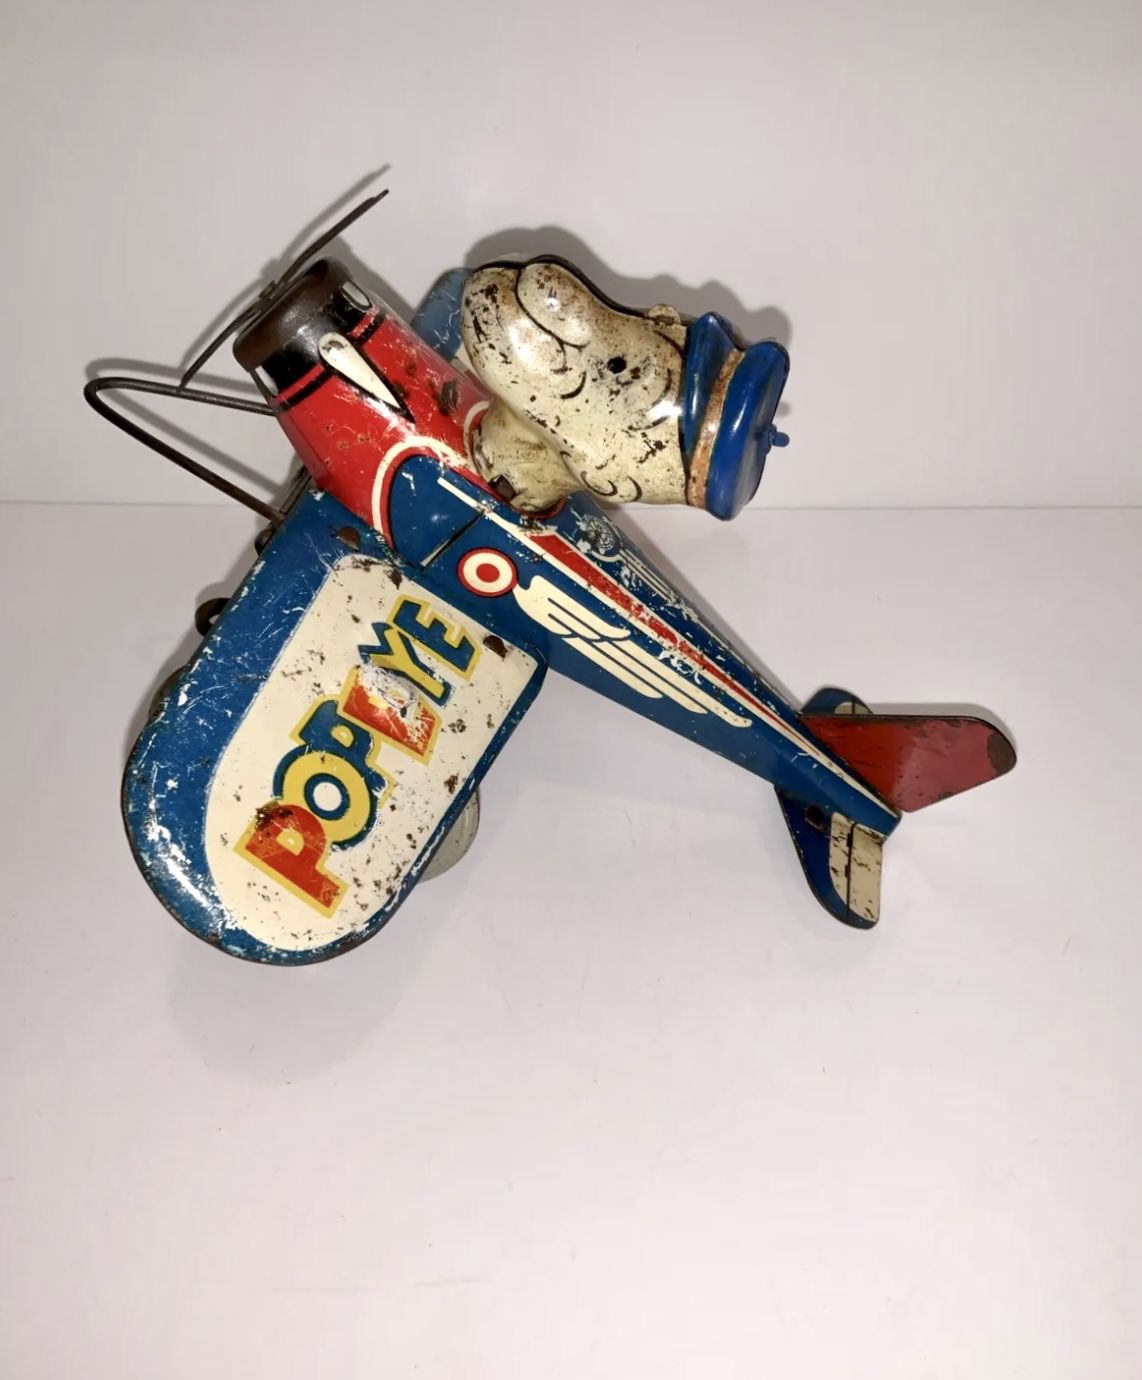 Antique 1940’s Popeye The Sailor Man Pilot Tin Wind-Up Marx Airplane Toy ~AS IS!